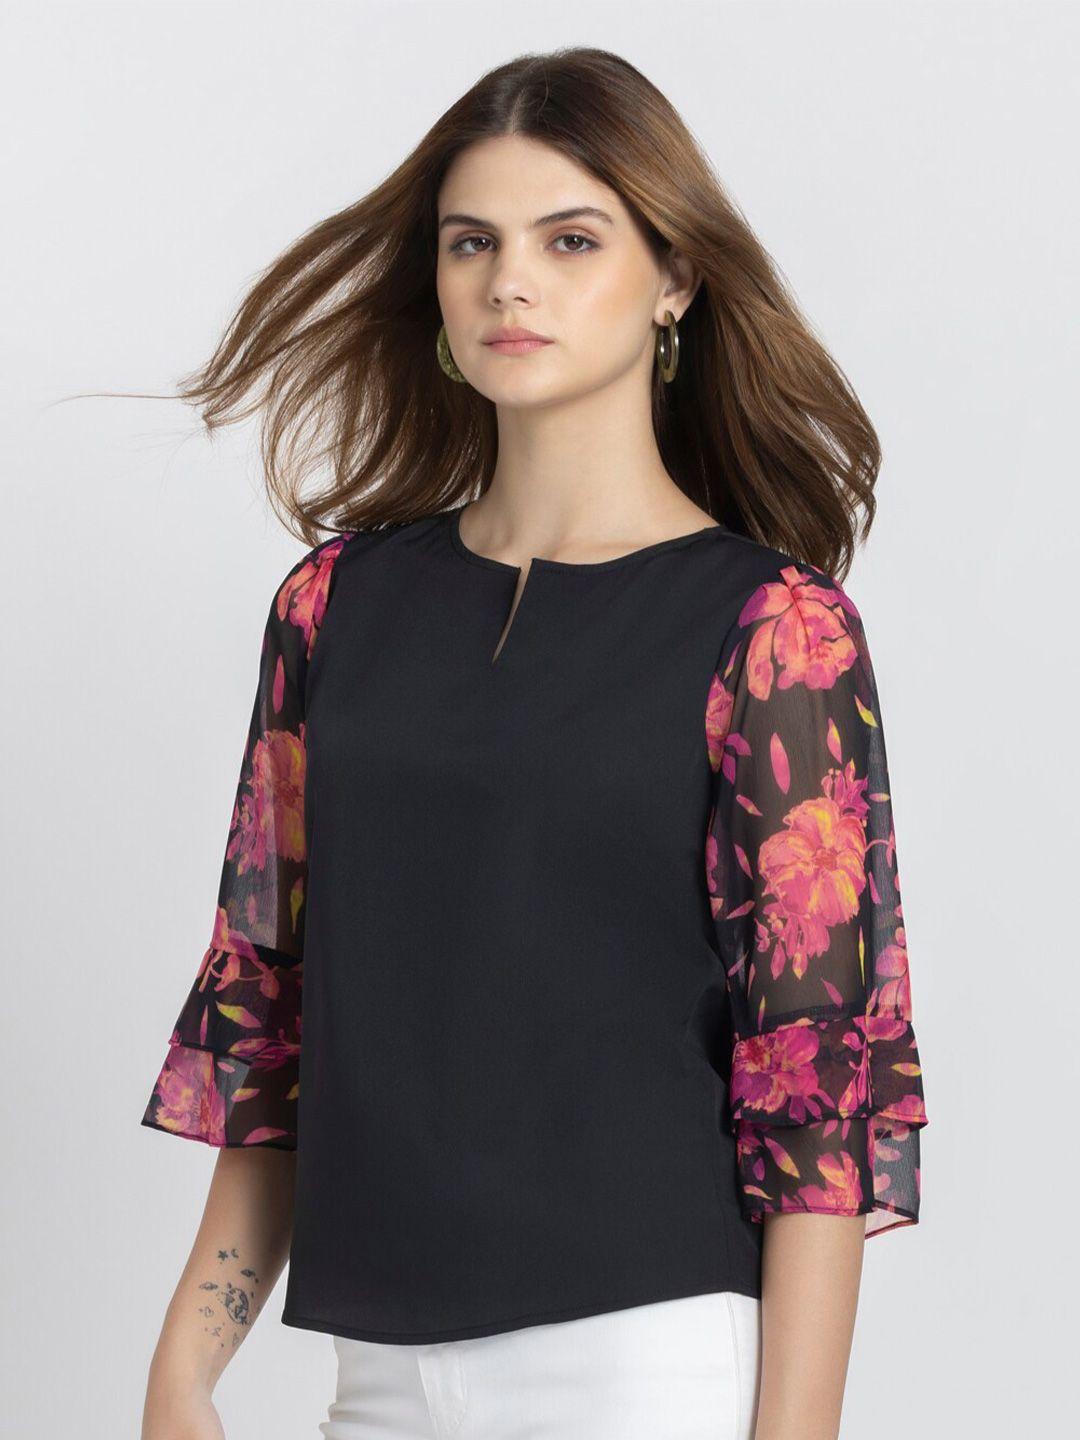 shaye-floral-flared-sleeve-casual-top